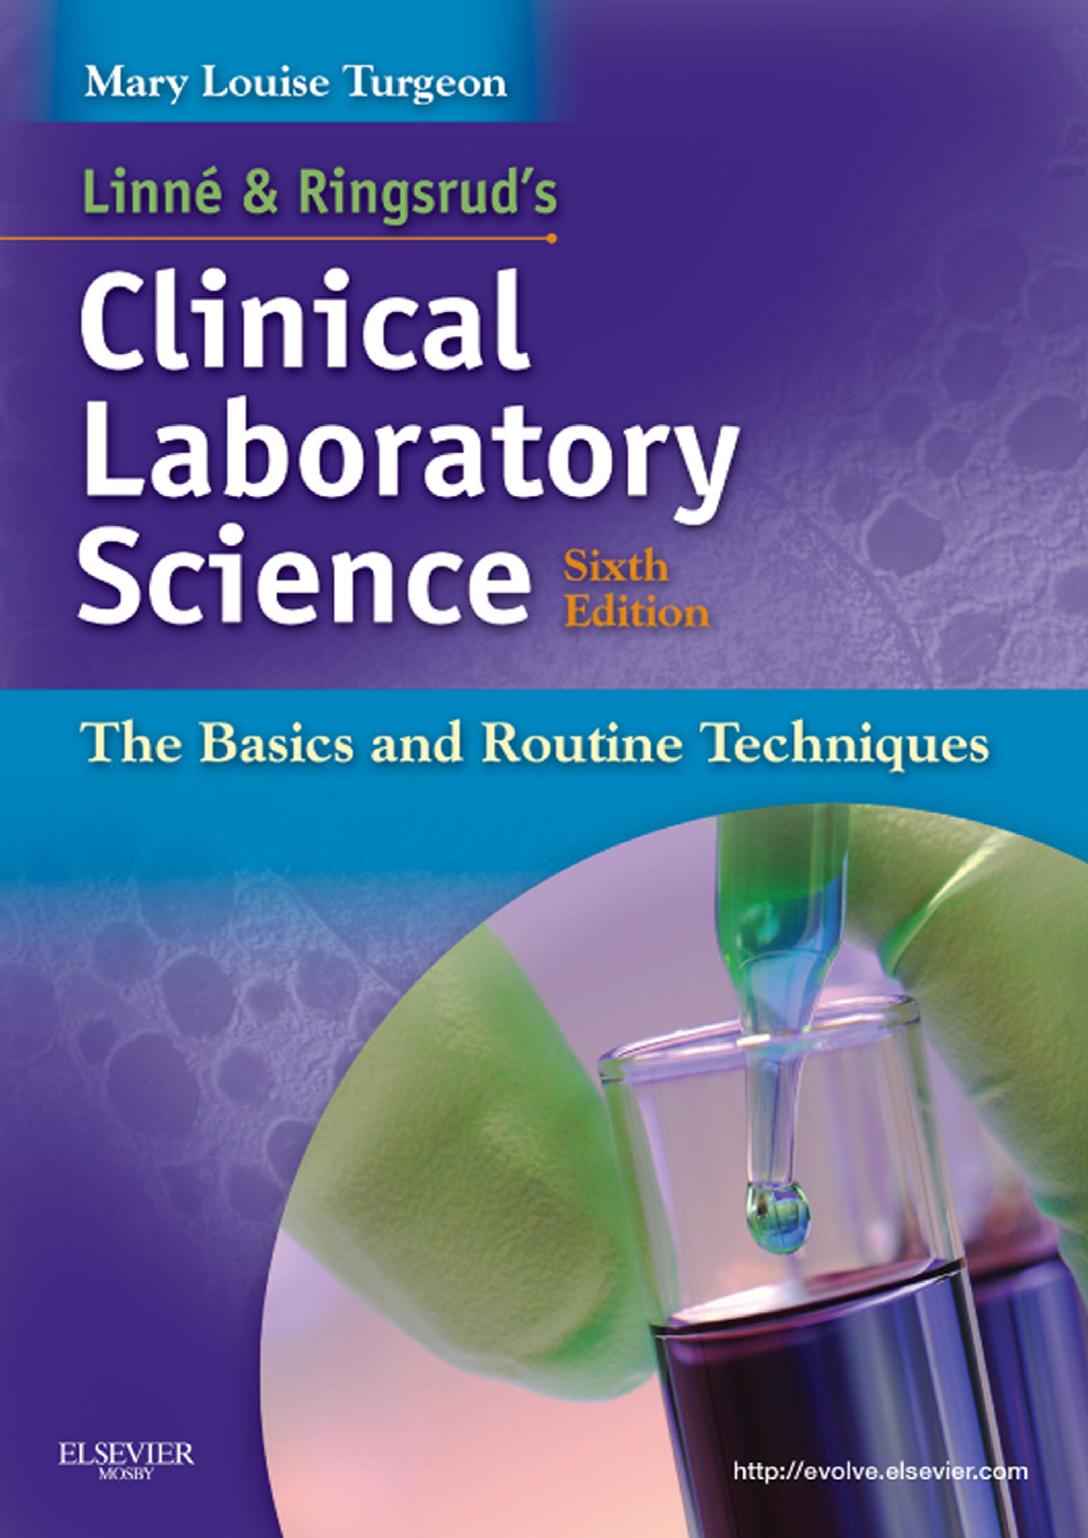 Linne & Ringsrud’s Clinical Laboratory Science. The Basics and Routine Techniques 6th ed. 2012.pdf